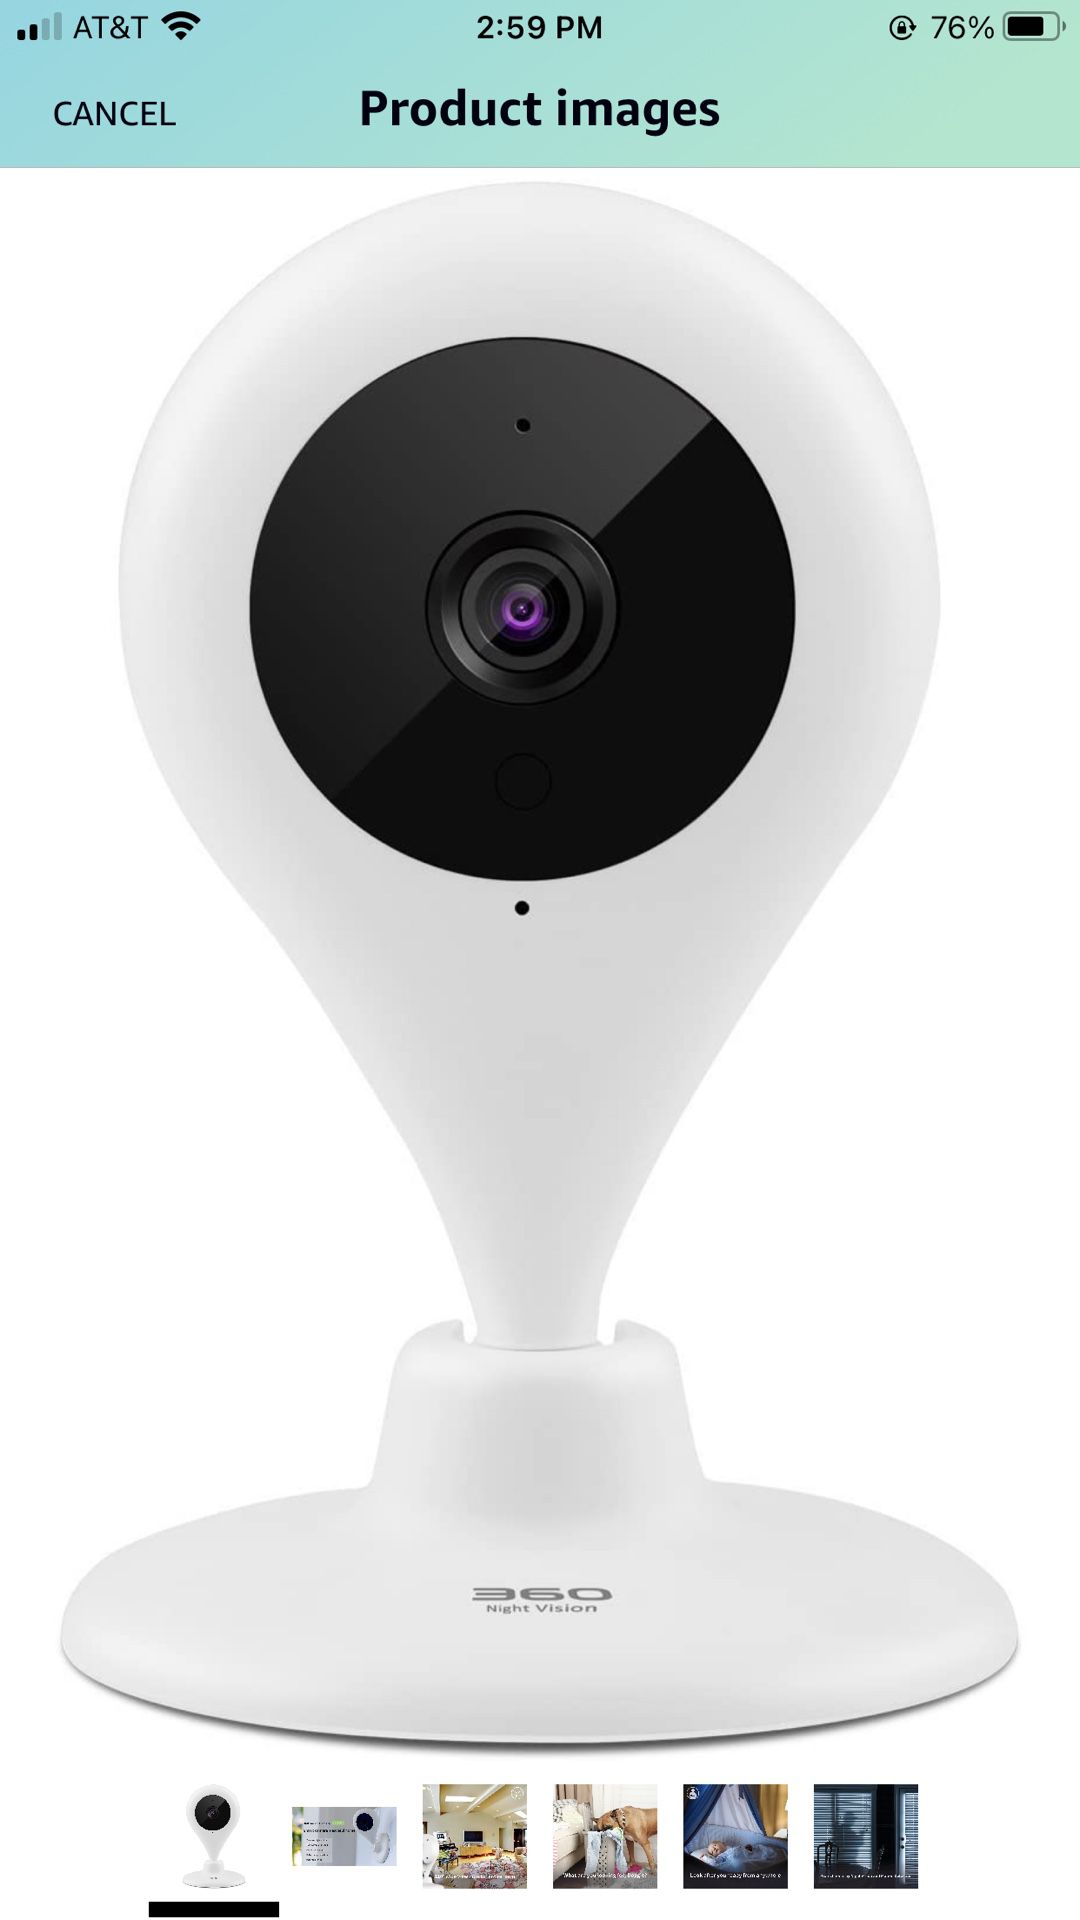 360 Home Security Camera IP Wireless Camera Surveillance System with Motion Detection Smart Camera - 720P White (US Edition).